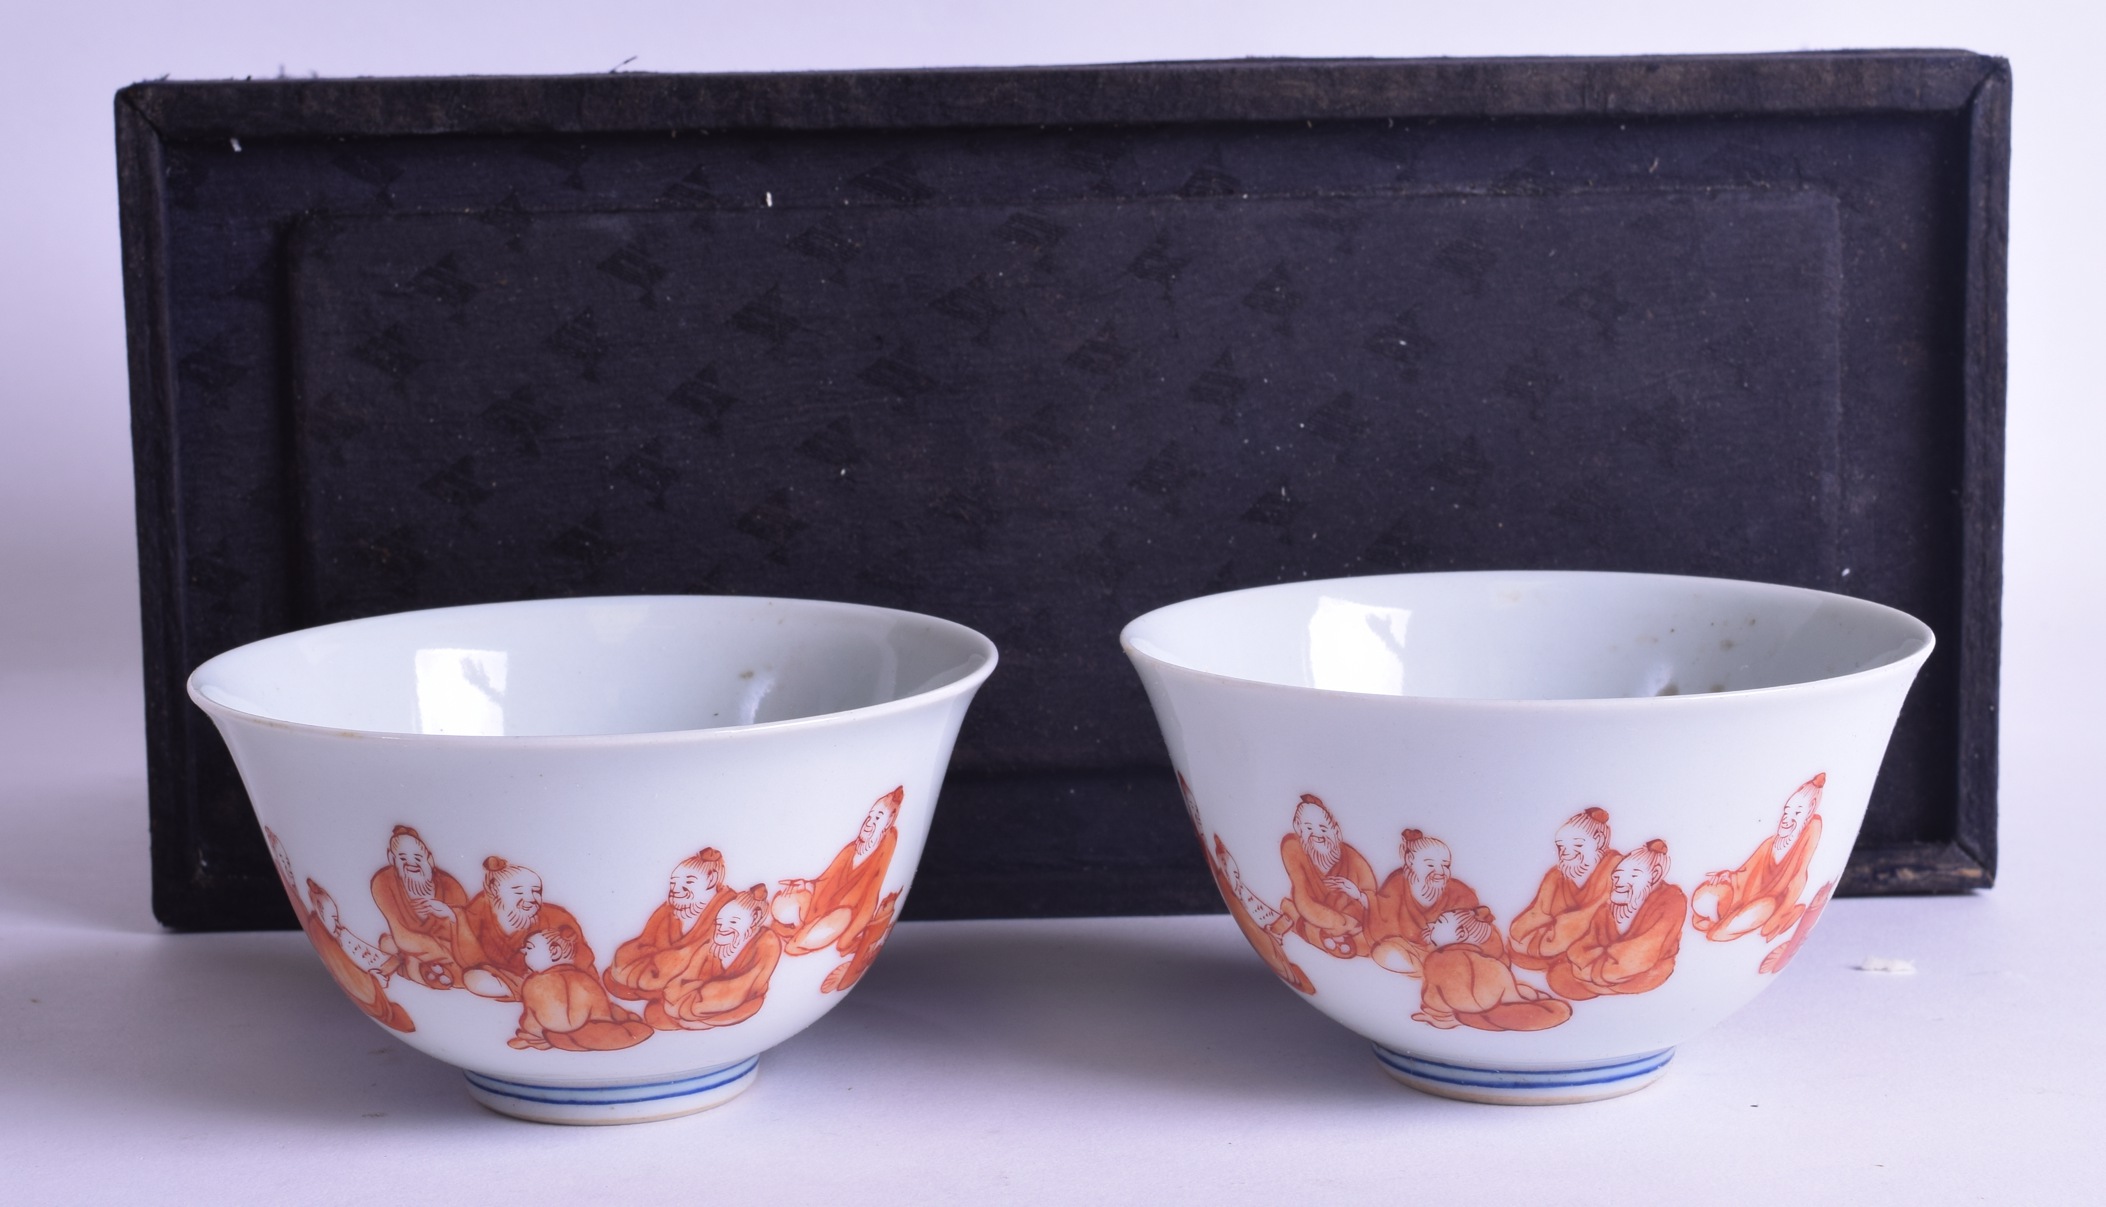 AN UNUSUAL PAIR OF EARLY 20TH CENTURY CHINESE IRON RED BOWLS painted with figures seated within - Image 2 of 3